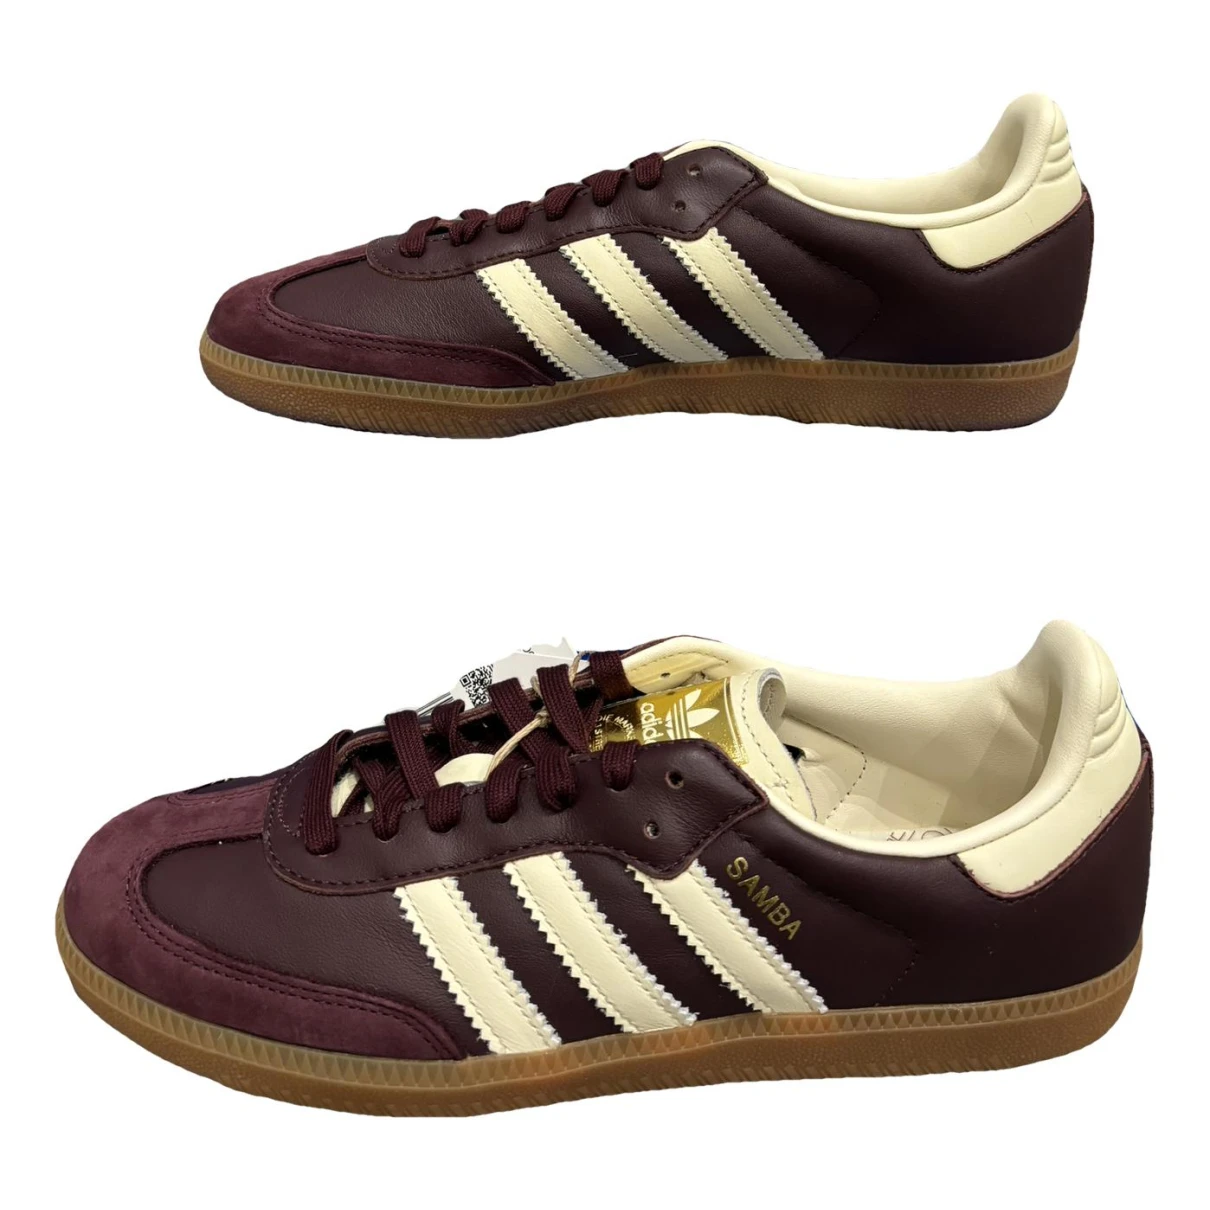 Pre-owned Adidas Originals Samba Leather Trainers In Burgundy